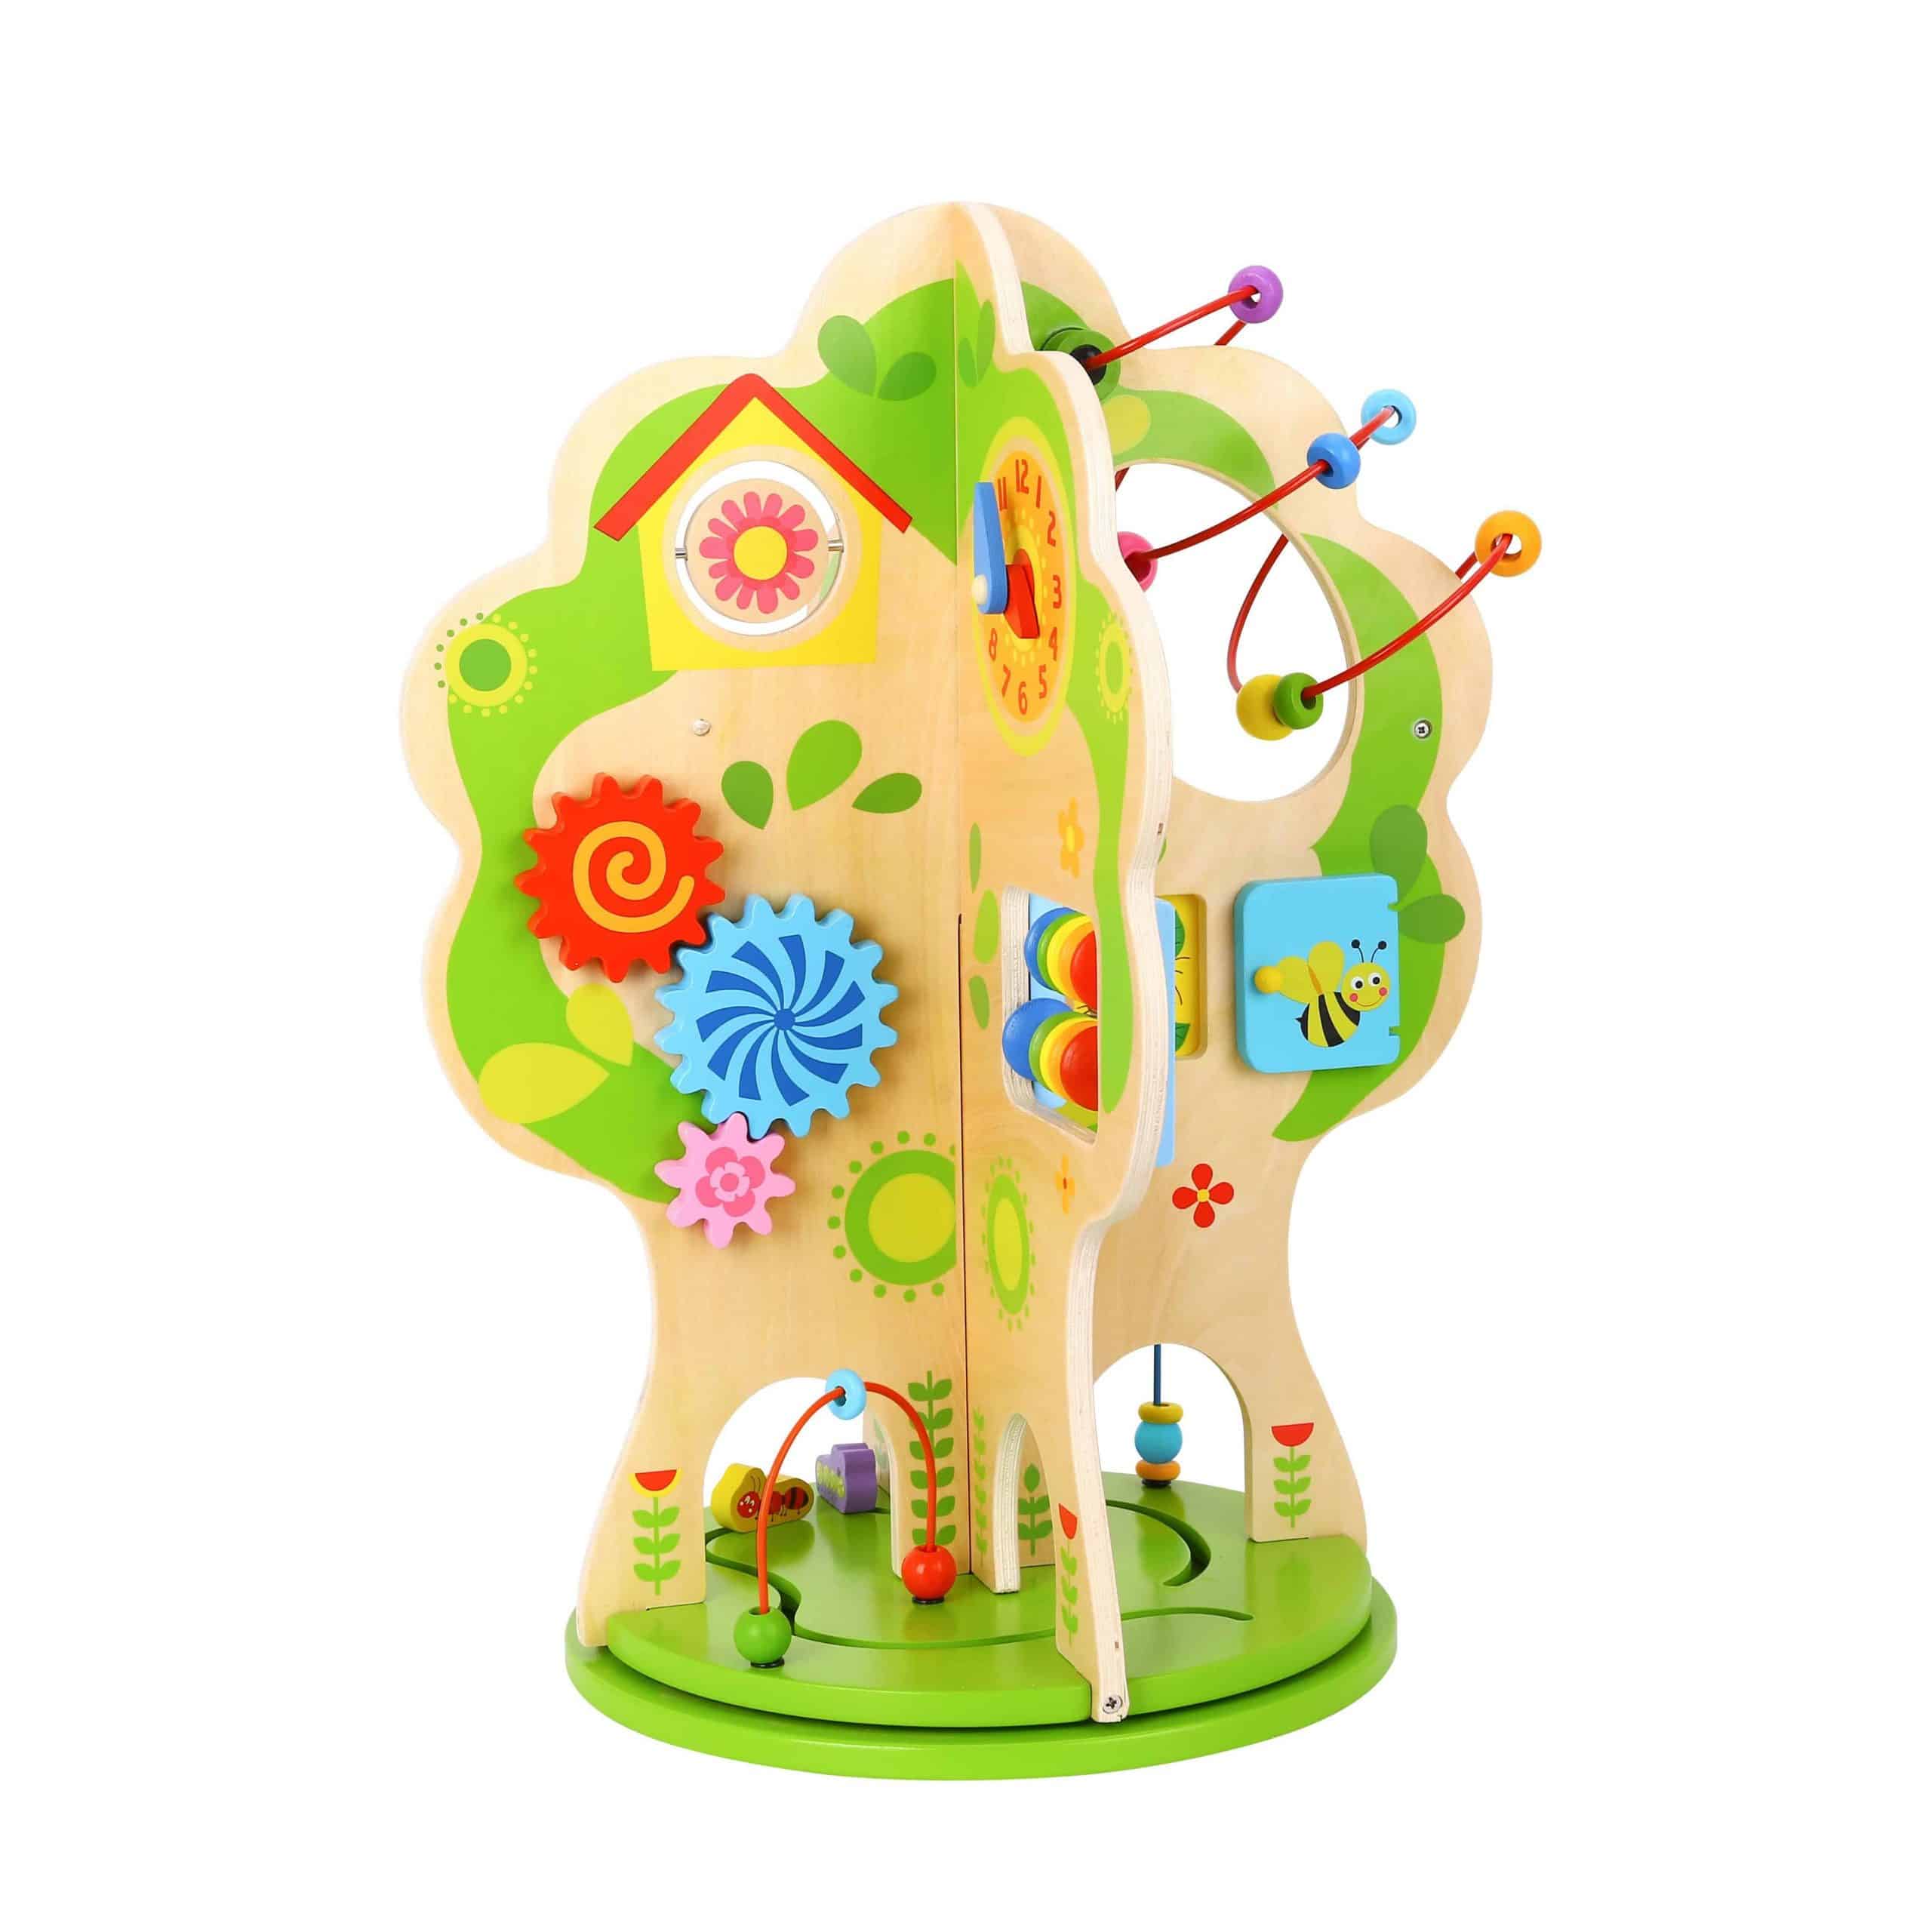 Rotating Activity Tree Tooky Toy 1598155401 scaled | Trio Kids Singapore | December, 2022